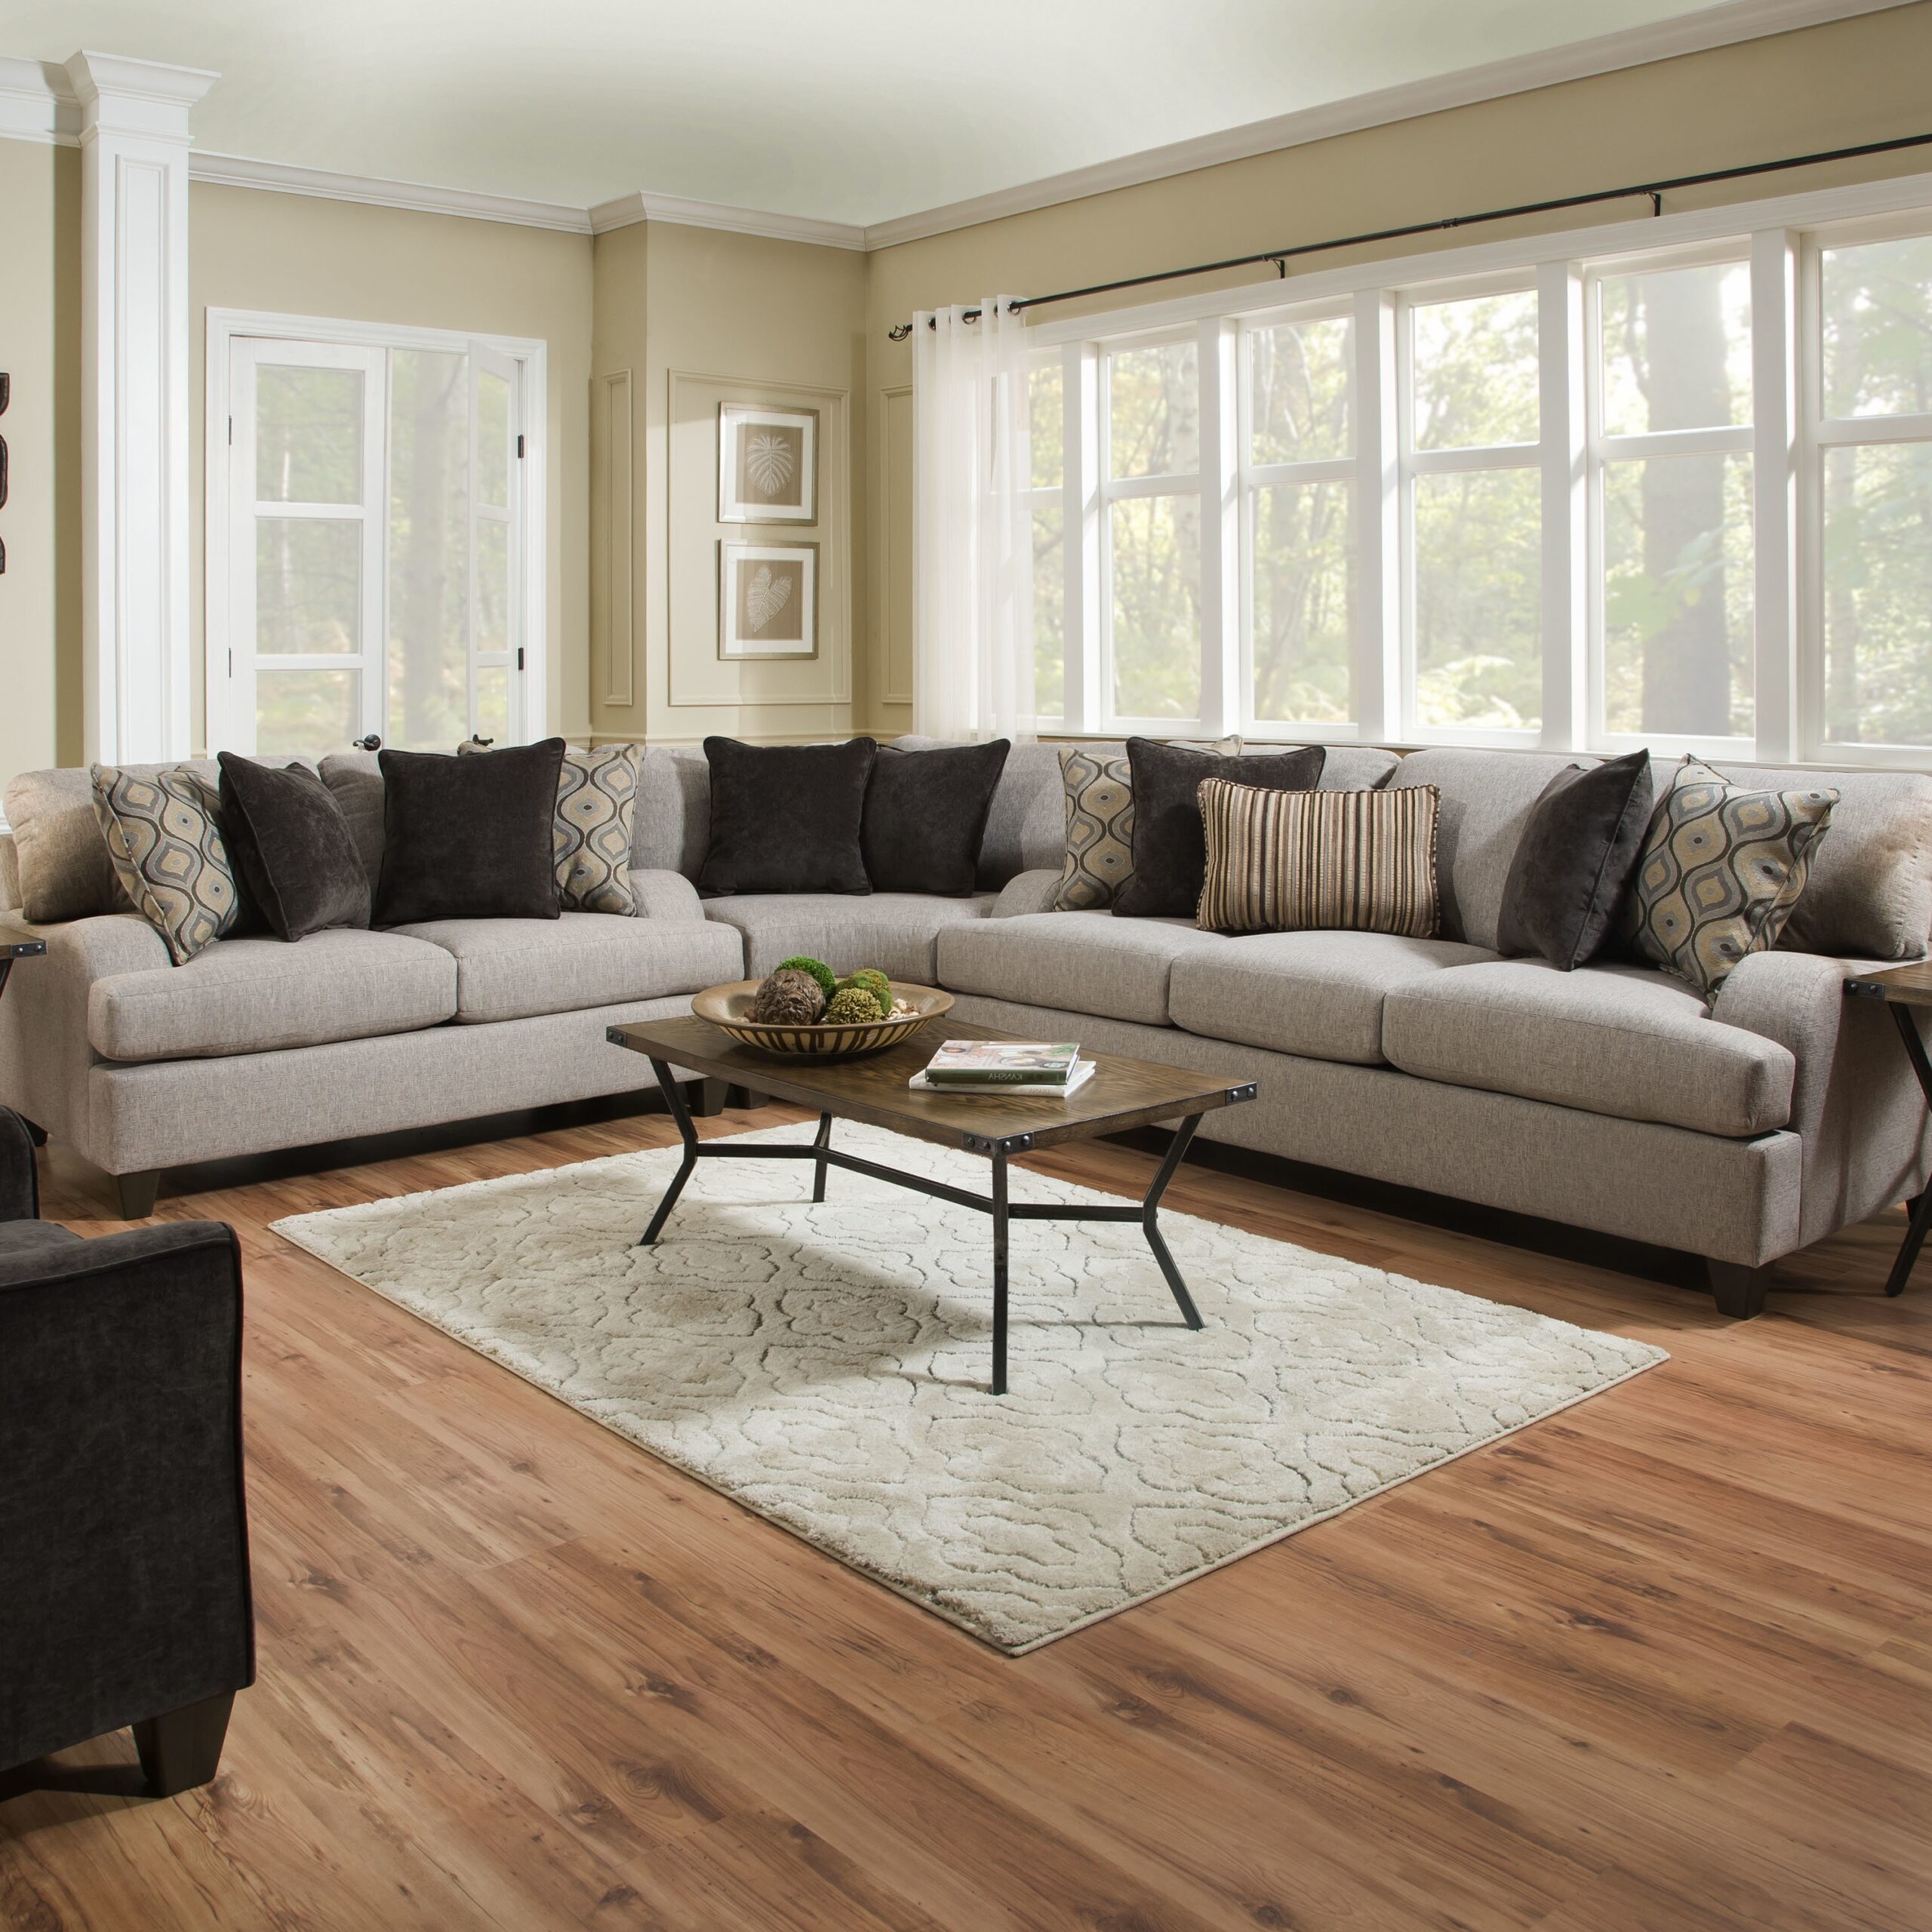 Extra Large Sectional Sofas